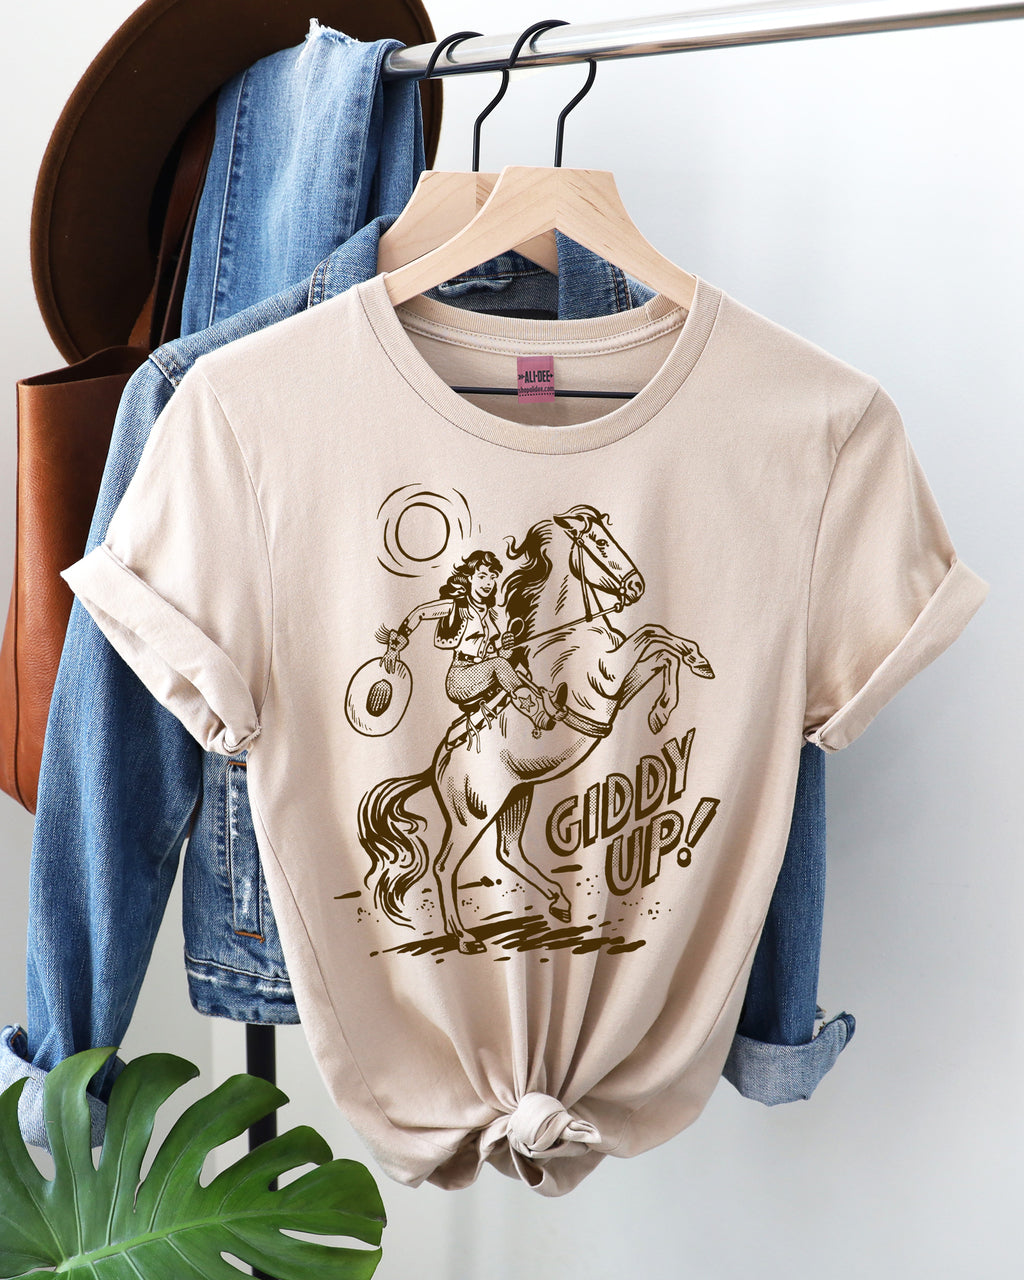 Giddy Up Graphic Tee - Heather Sand Dune